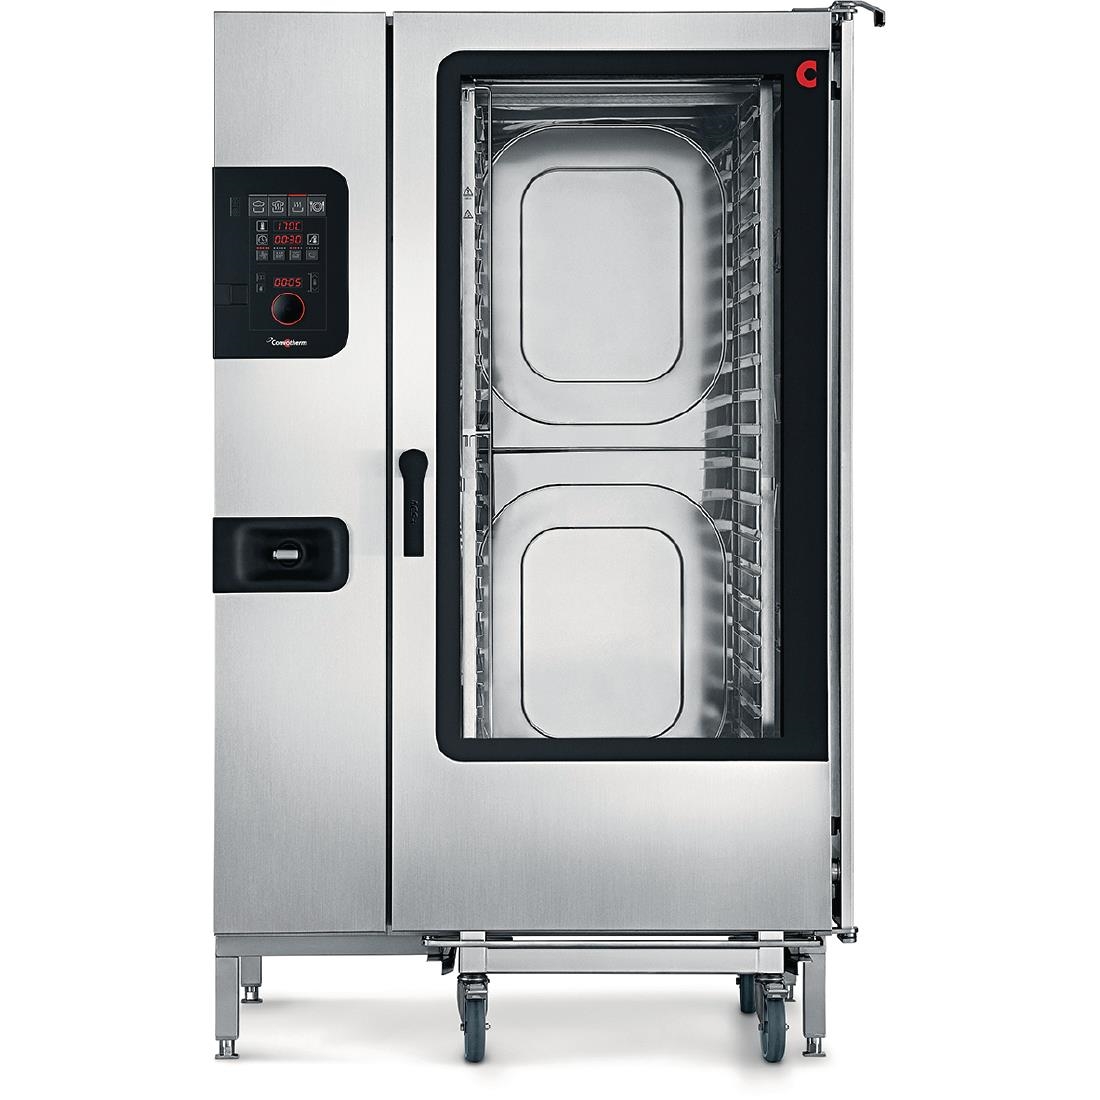 Convotherm 4 easyDial Combi Oven 20 x 2 x1 GN Grid and Install